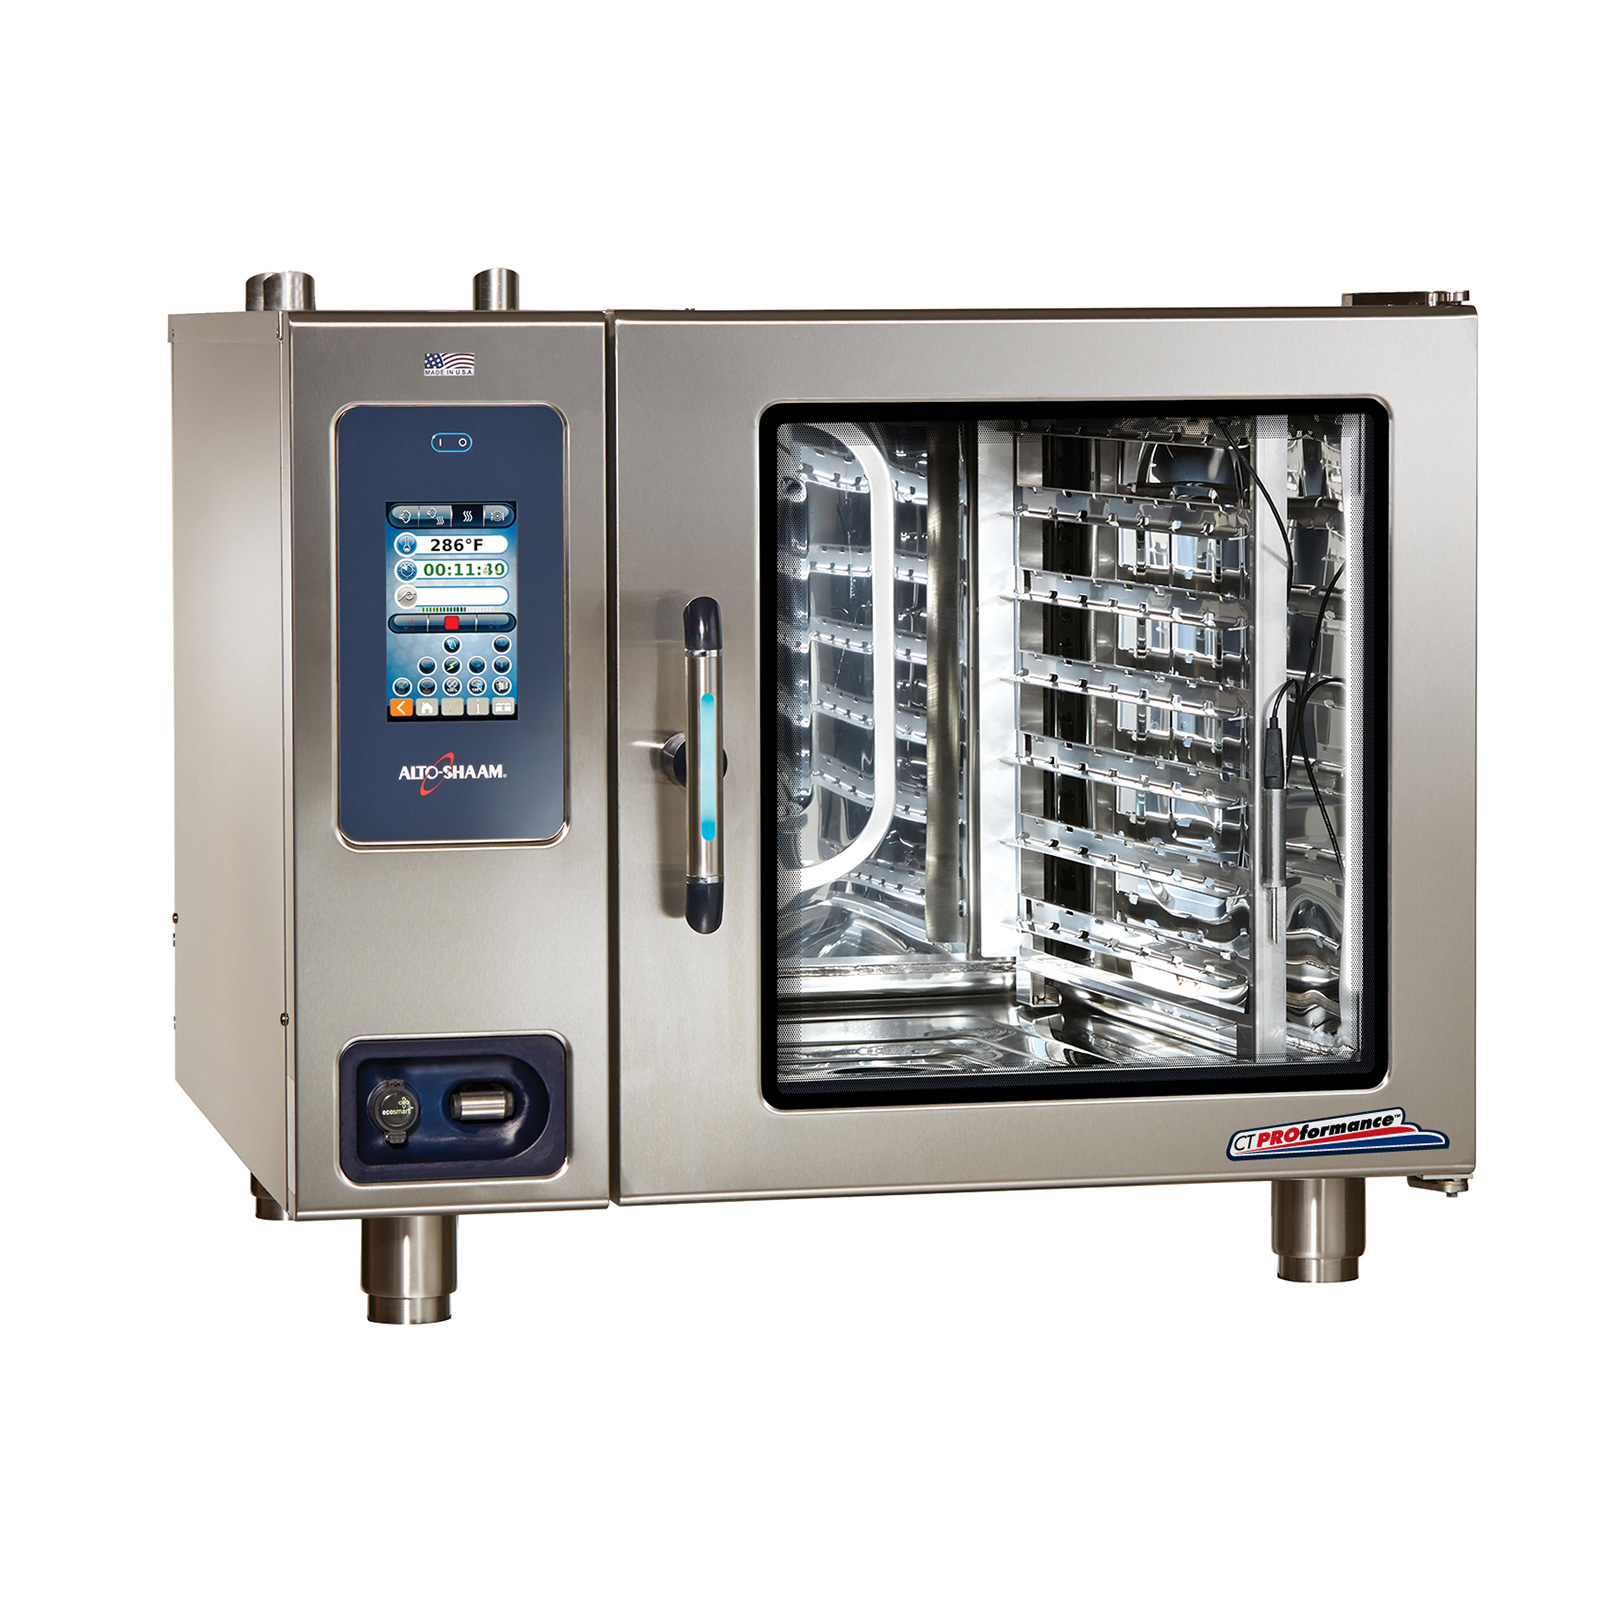 Alto-Shaam CTP7-20G Combi Oven, Gas, Full Size